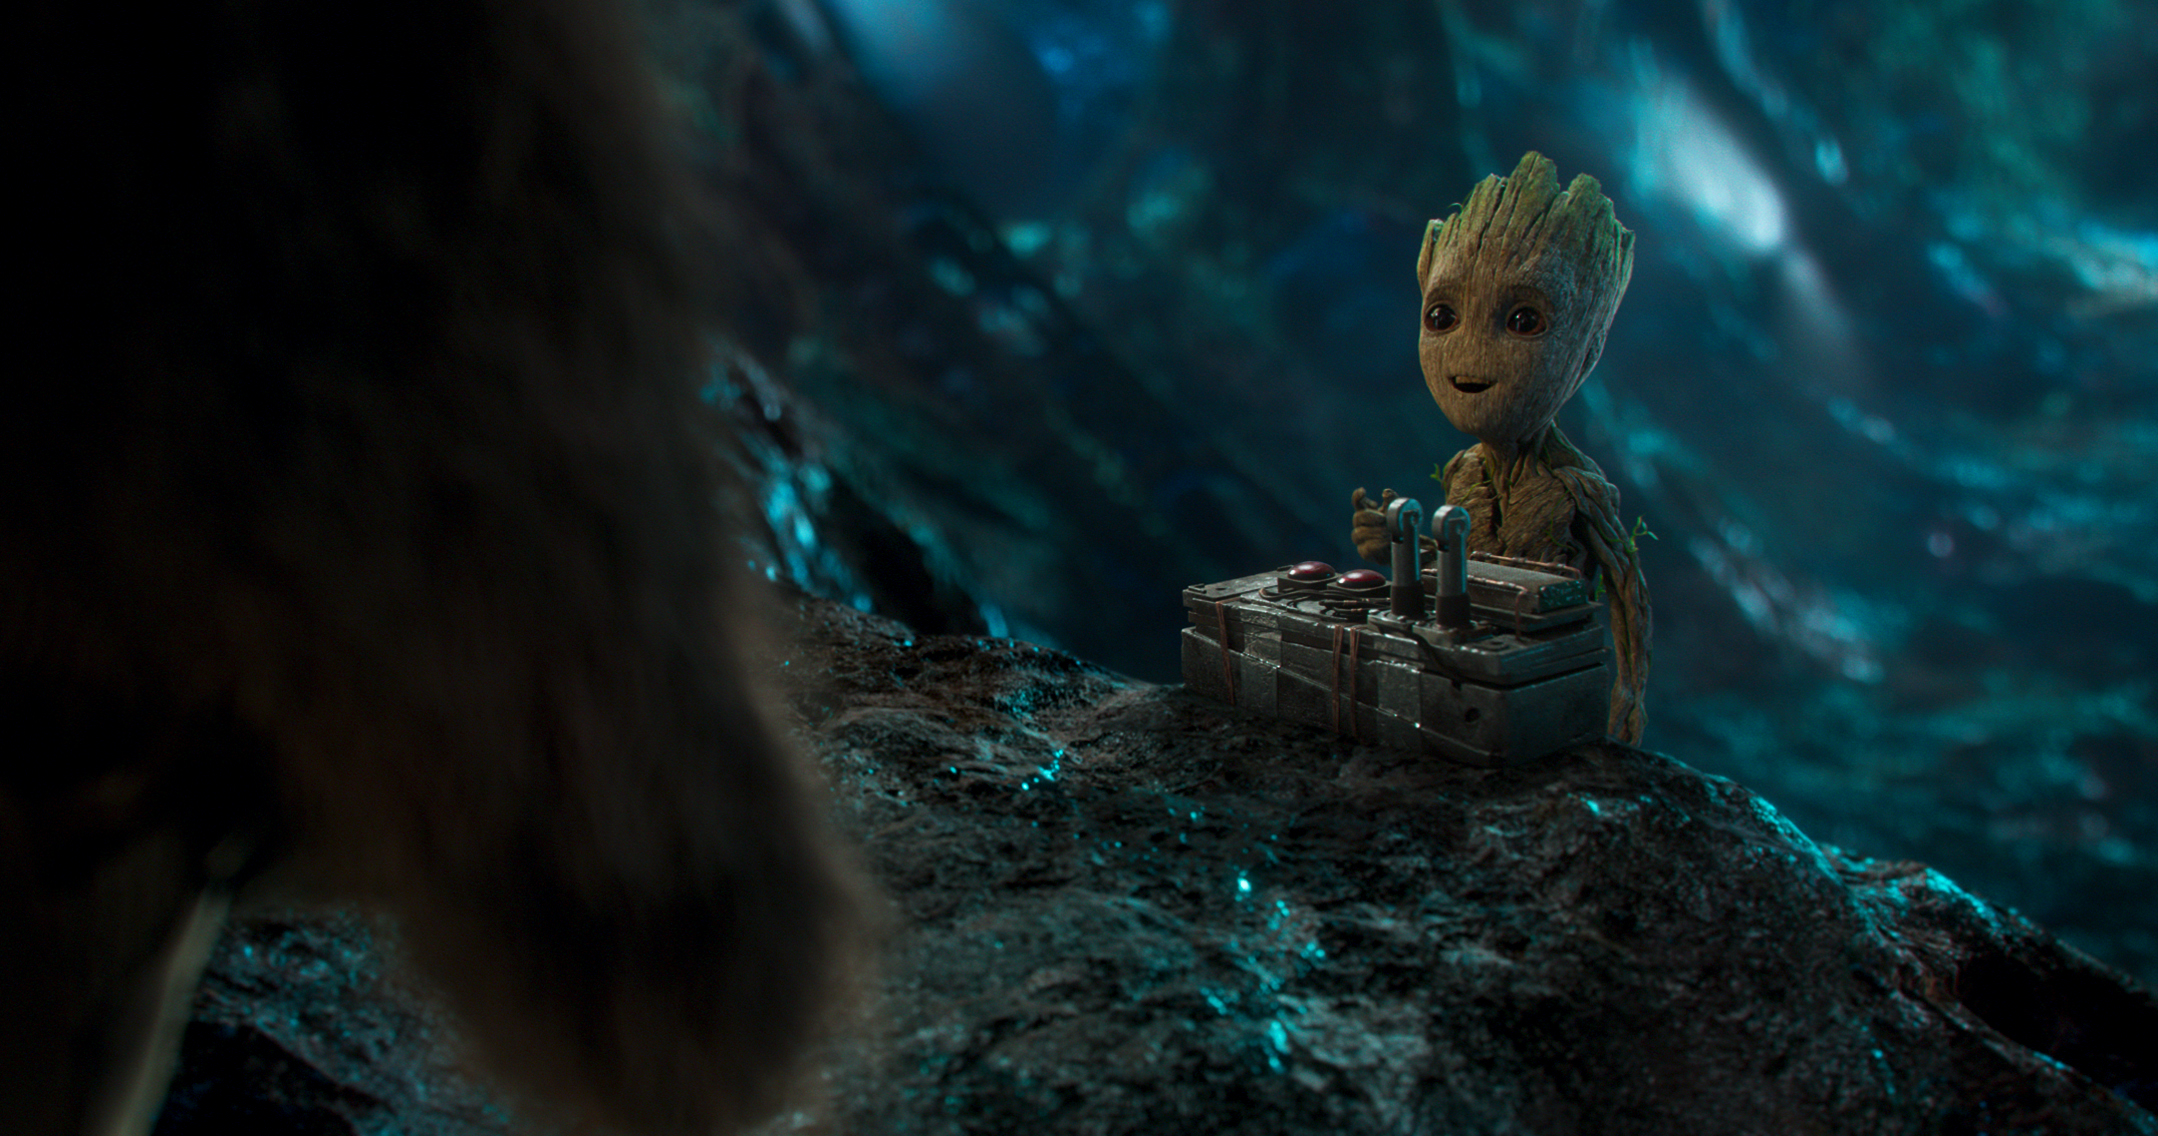 groot, movie, guardians of the galaxy vol 2